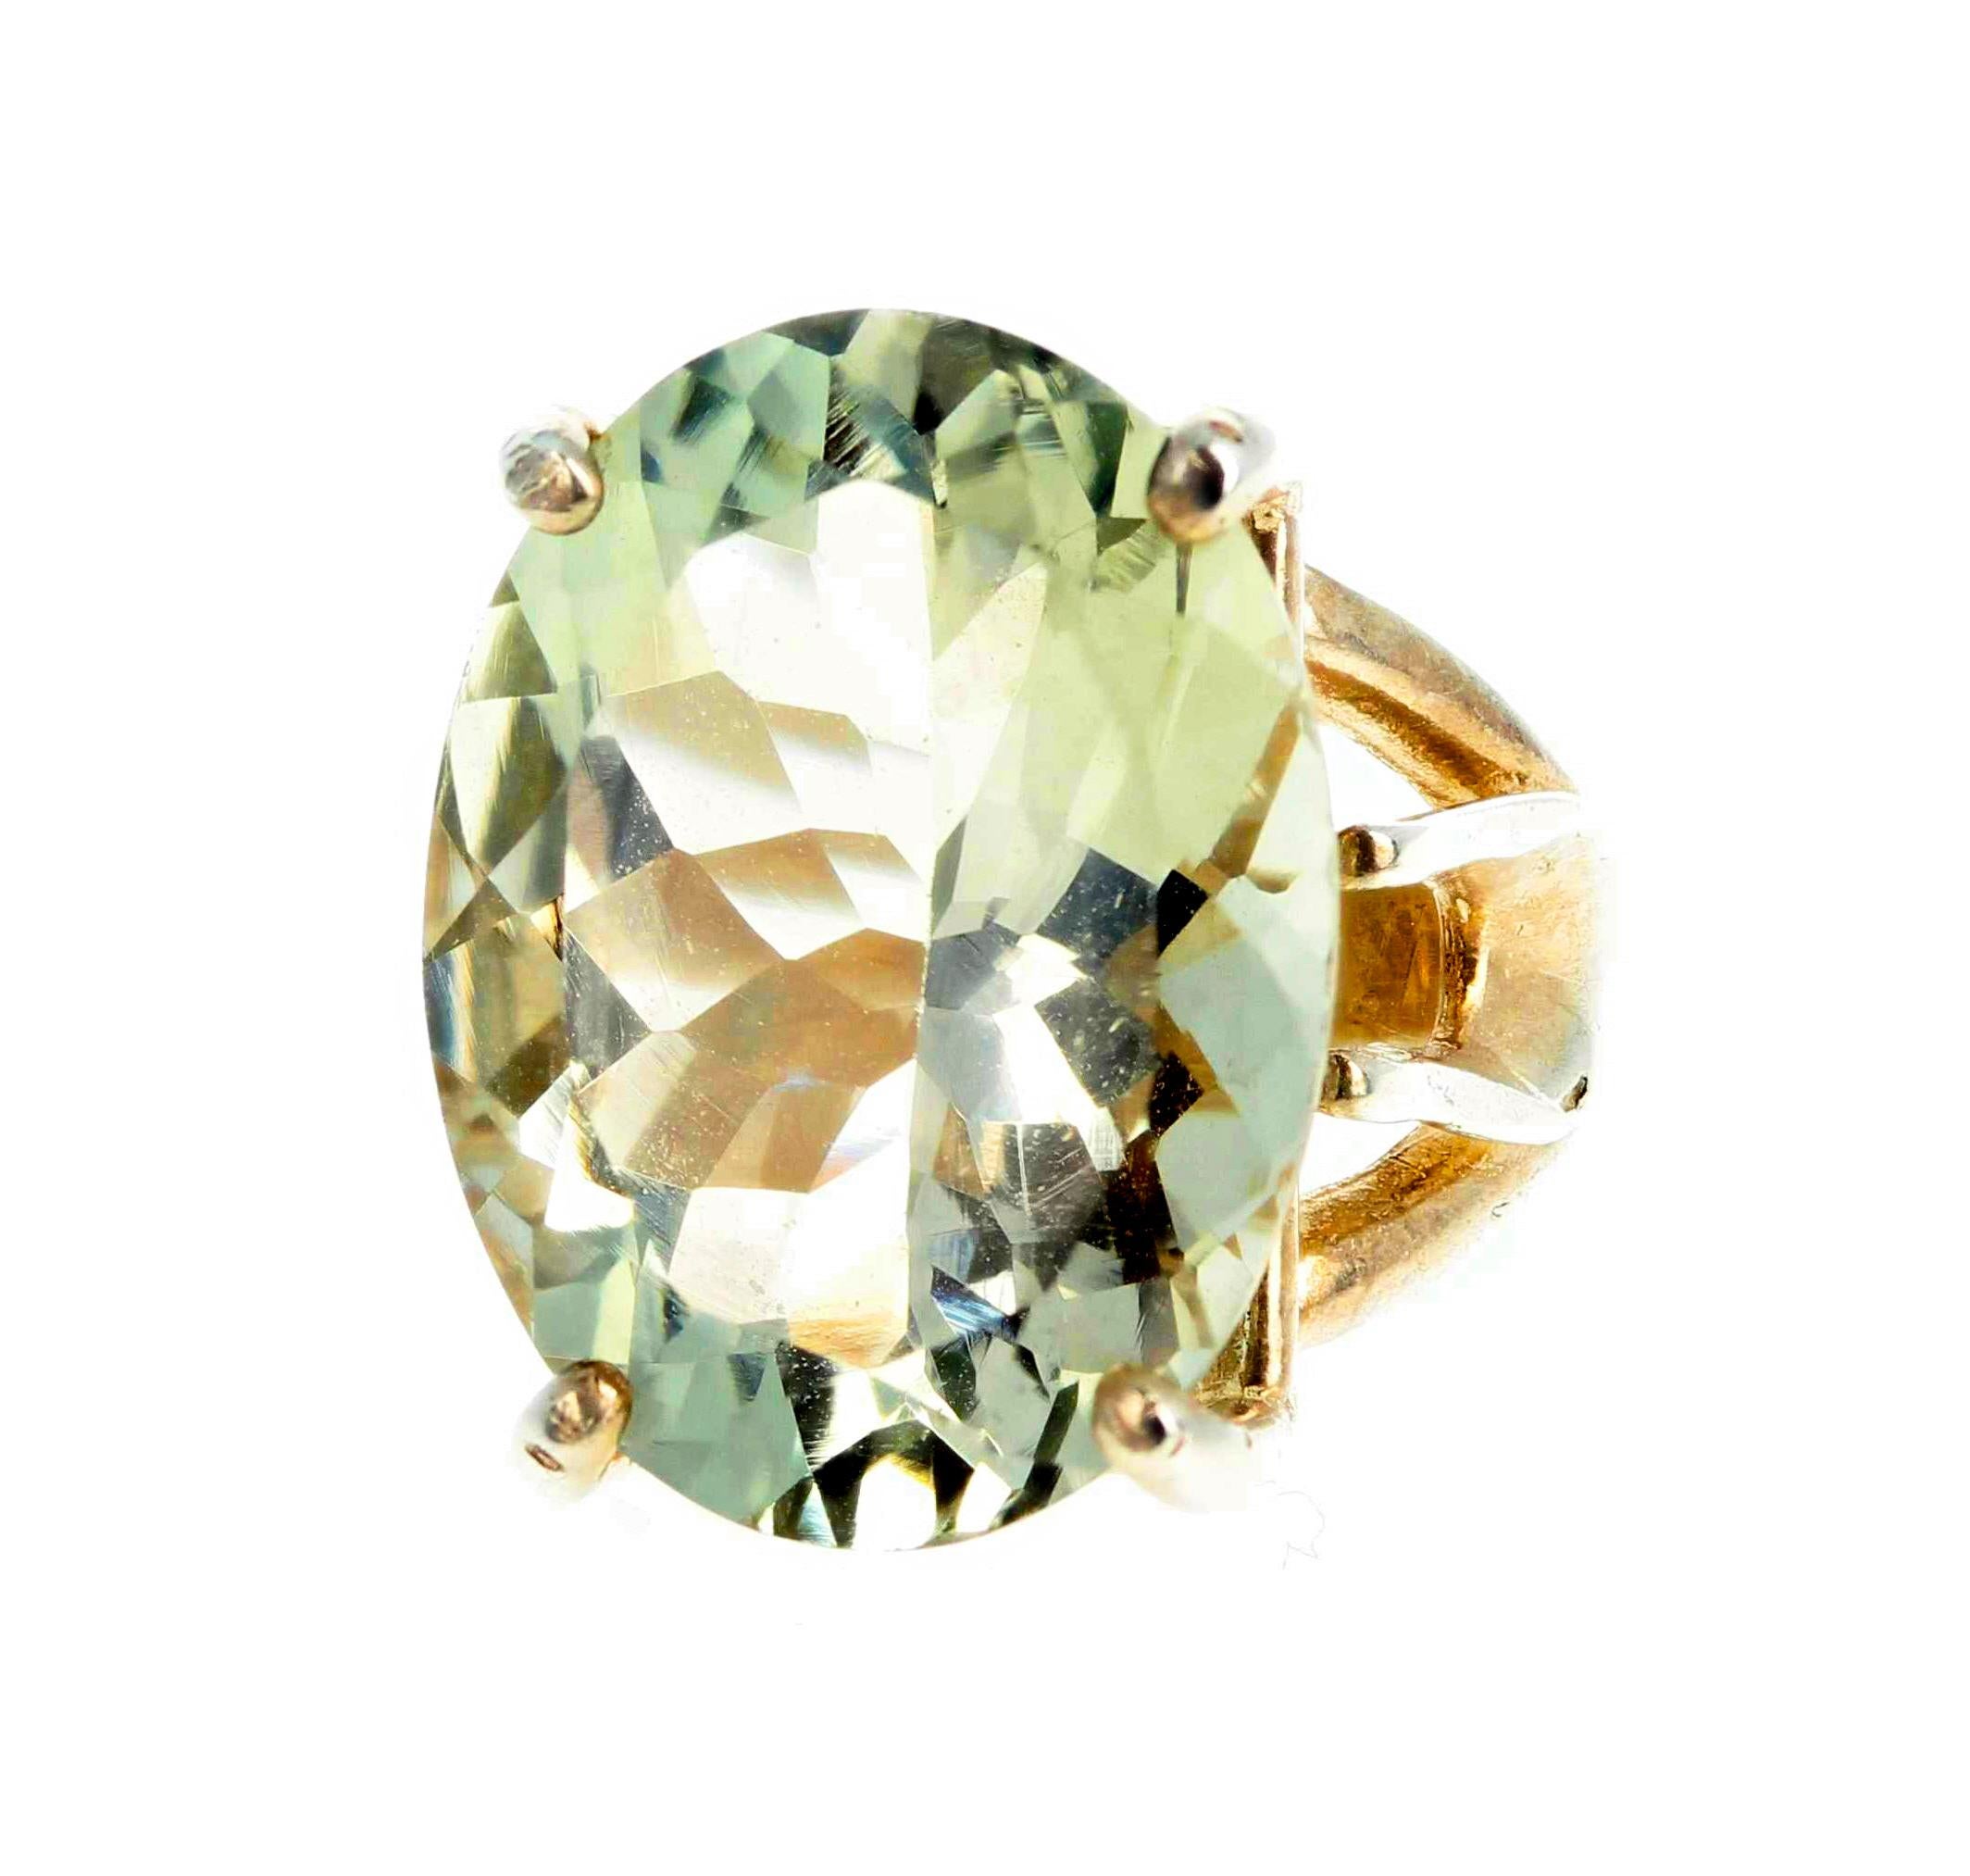 Glittering sparkling glowing huge 12 carat Green Amethyst (18.8 mm x 14.2 mm set in a sterling silver ring size 5 sizable.  There are no eye visible inclusions in this gorgeous green Amethyst.  Spectacular optical effect  exhibits green and silver